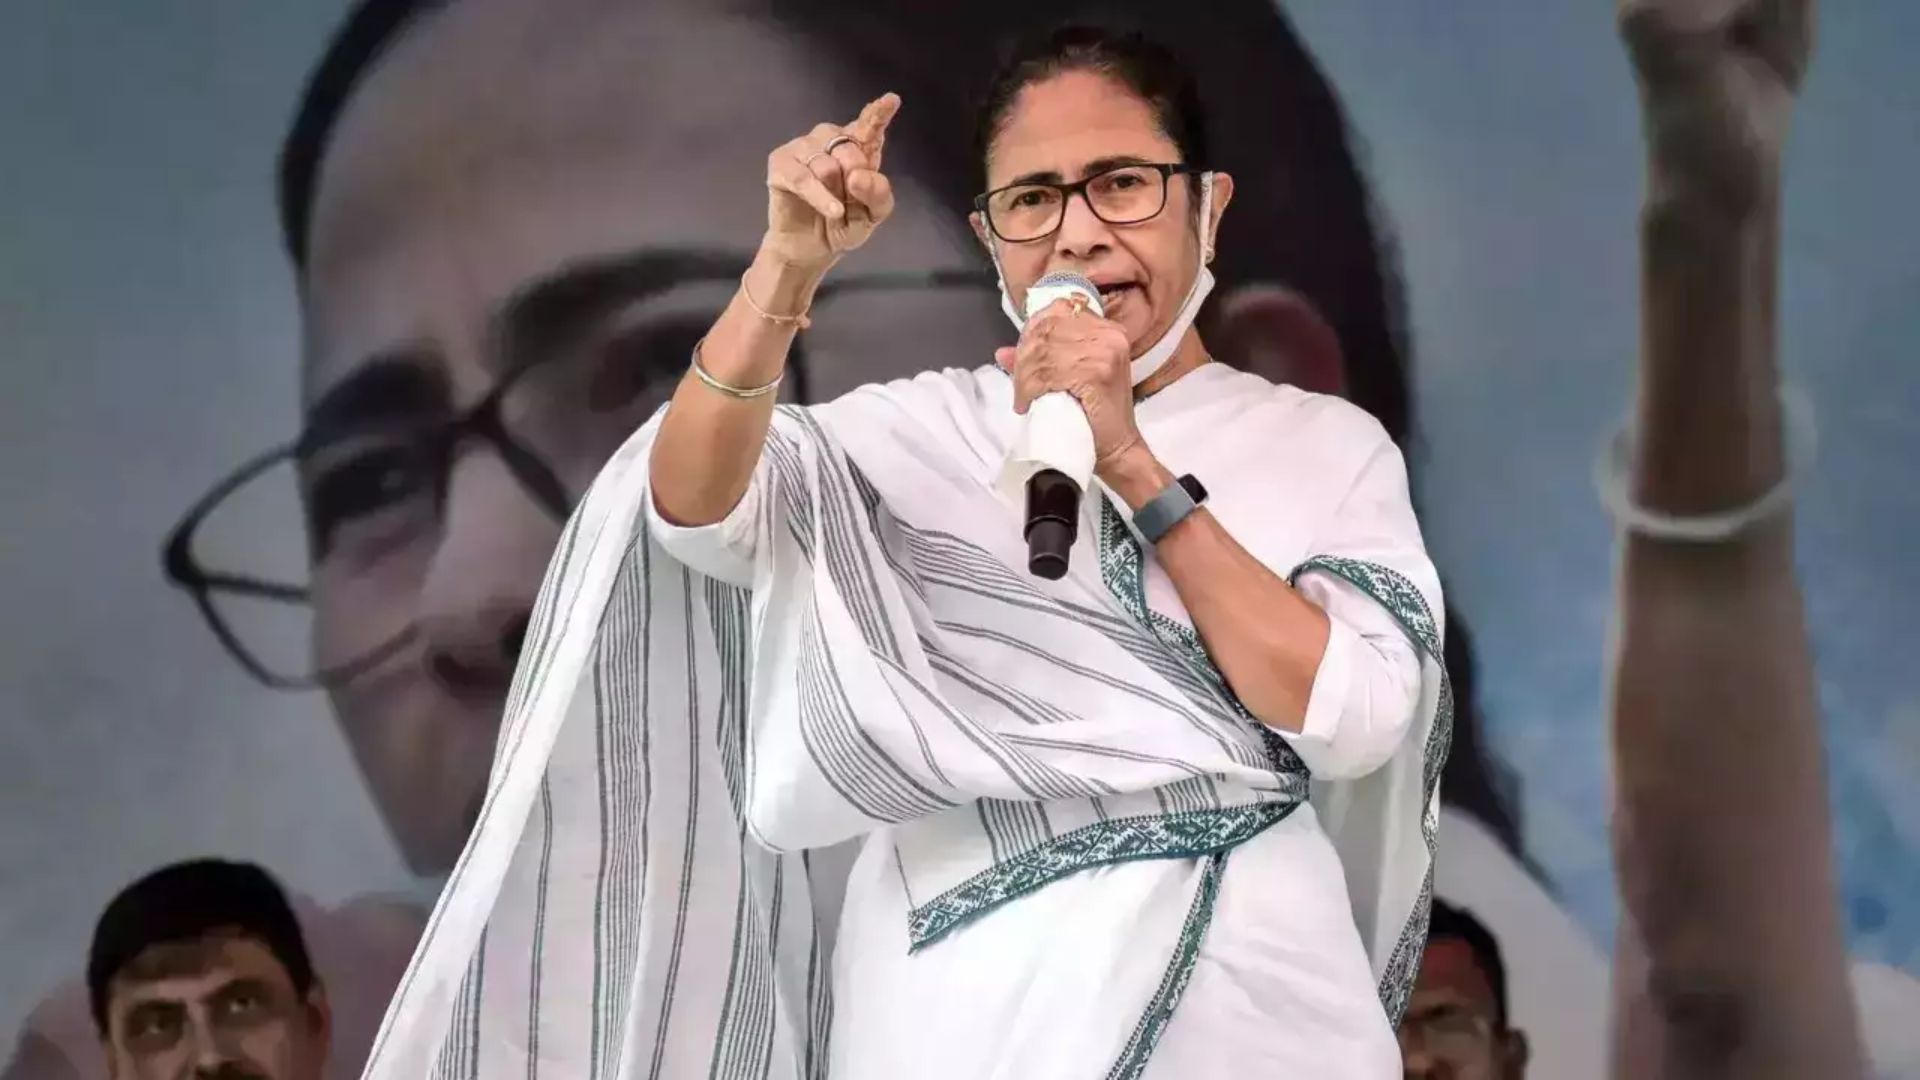 Sandeshkhali violence: CM Mamata Banerjee ties unrest to “RSS”, says ‘Will address but need to know the matter to act’